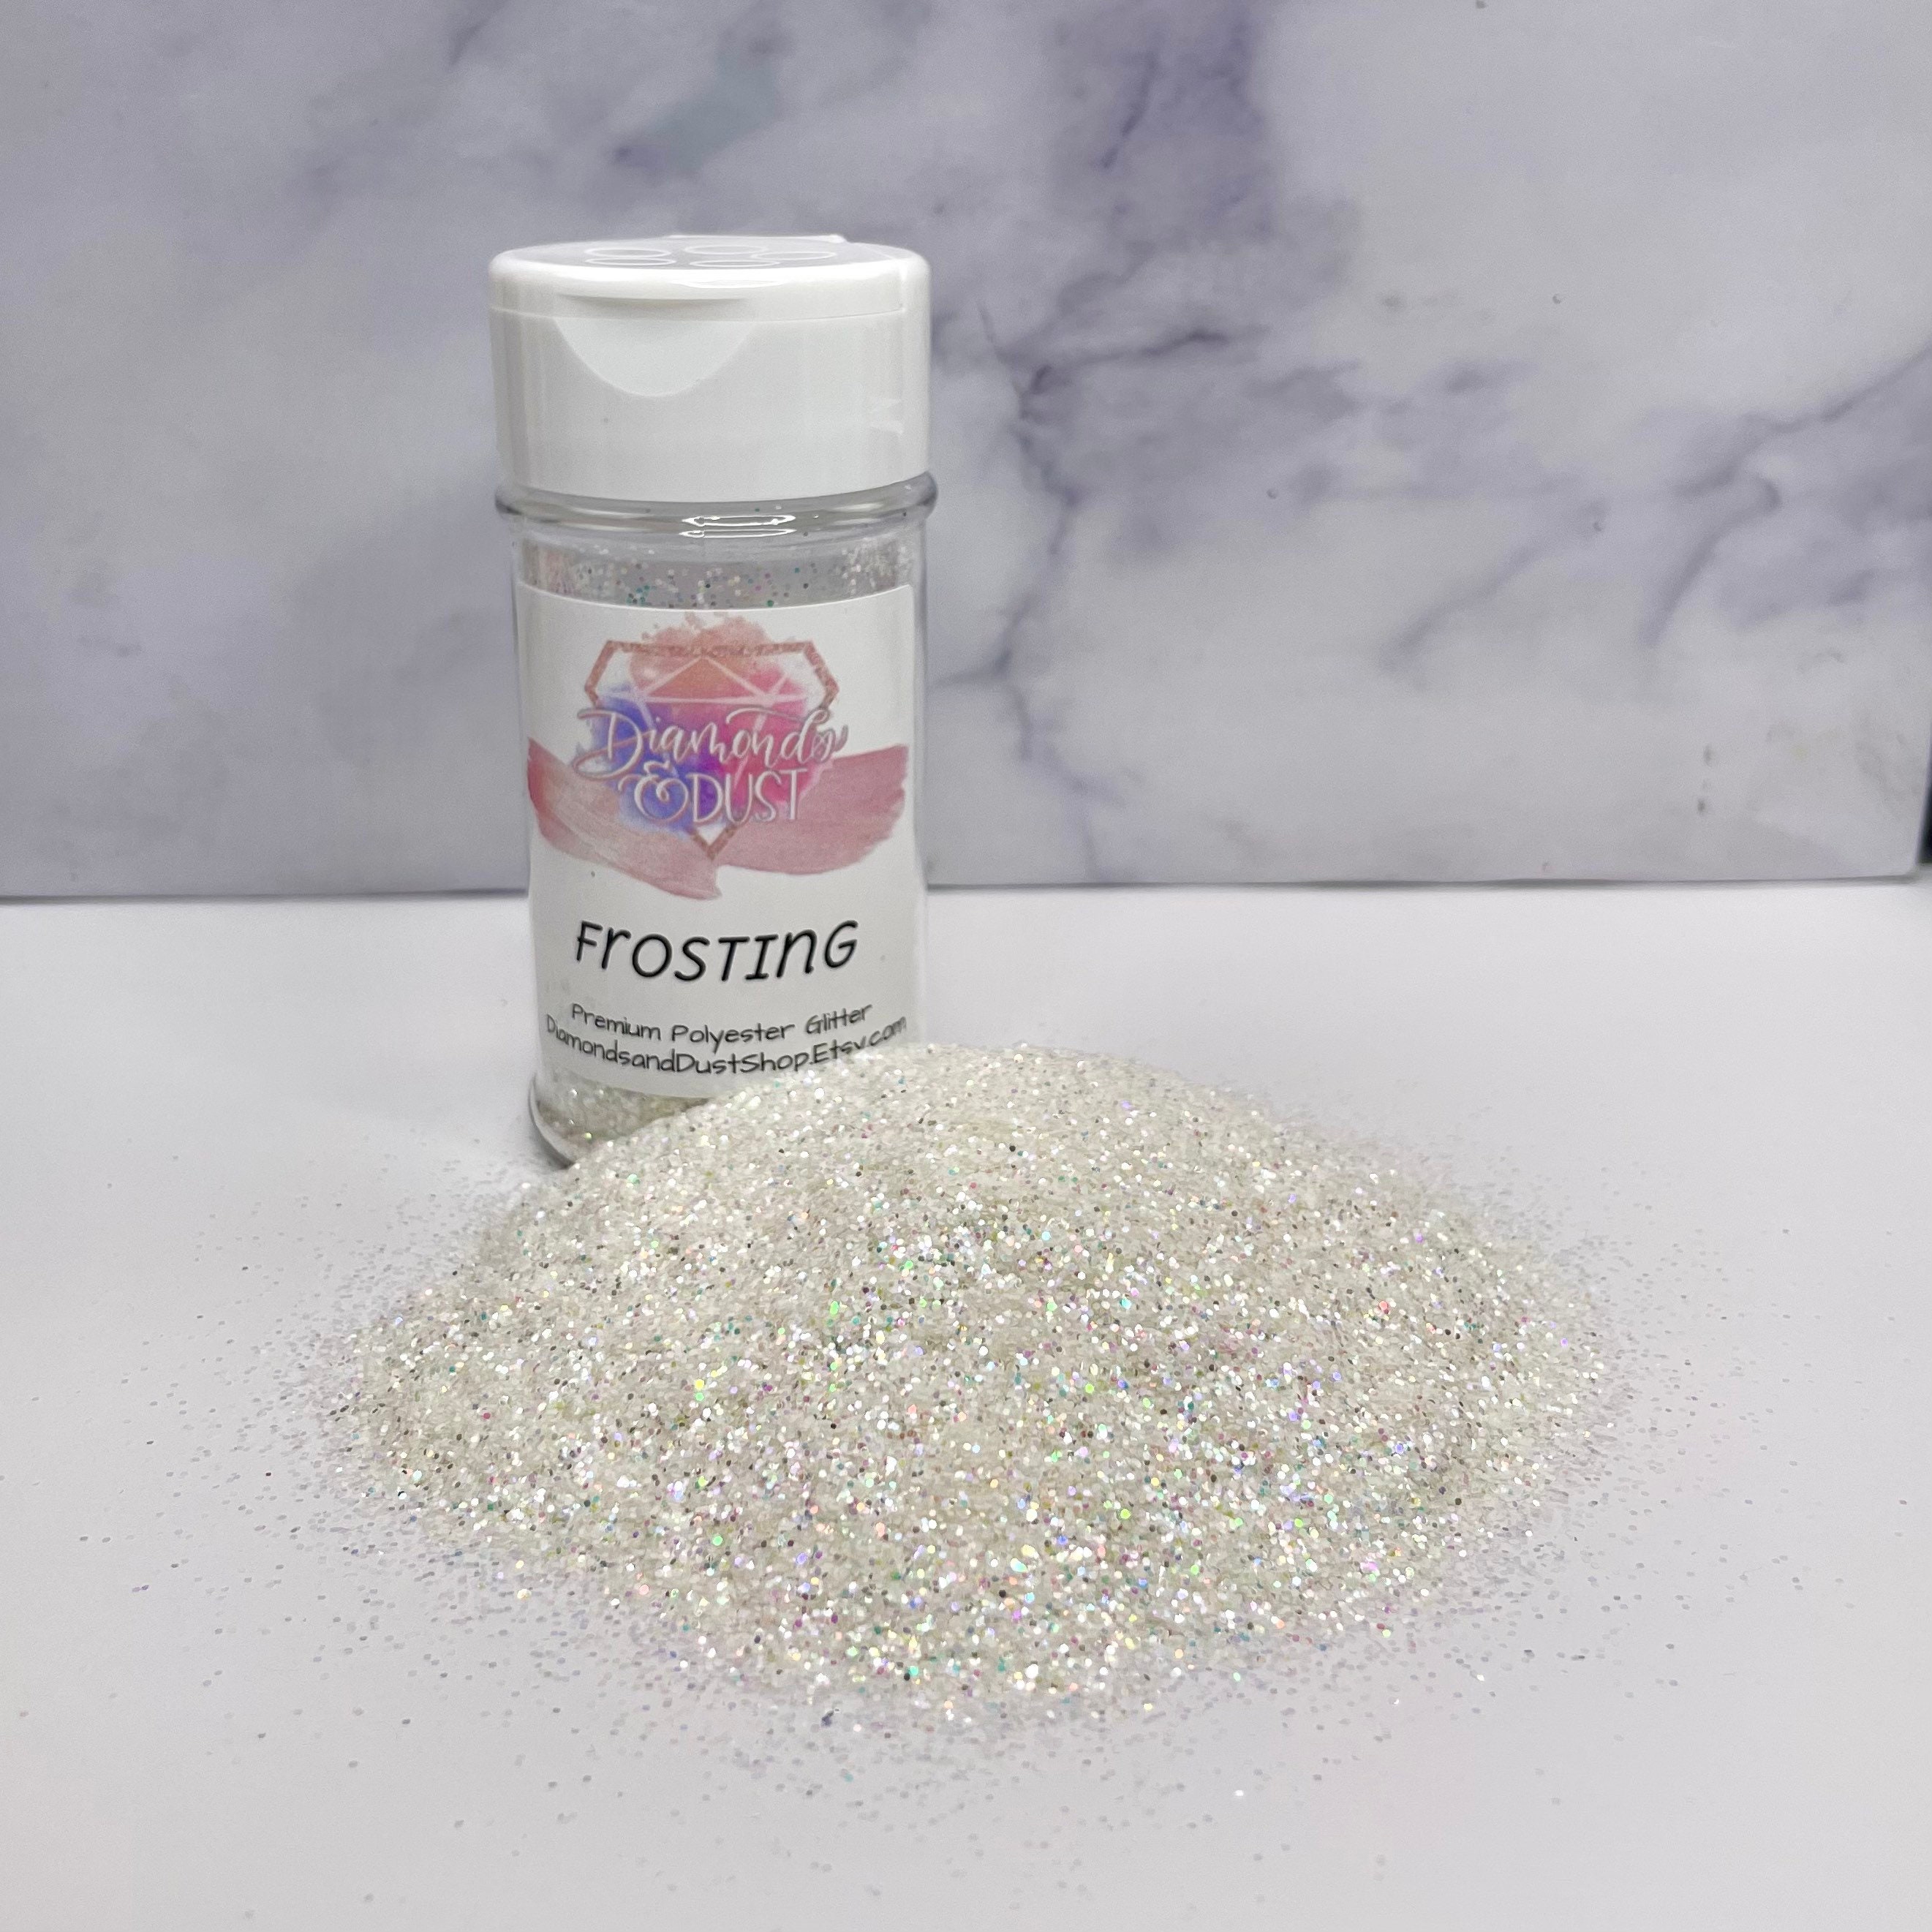 Natural Diamond Dust Or Powder, For Industrial And Commerical at